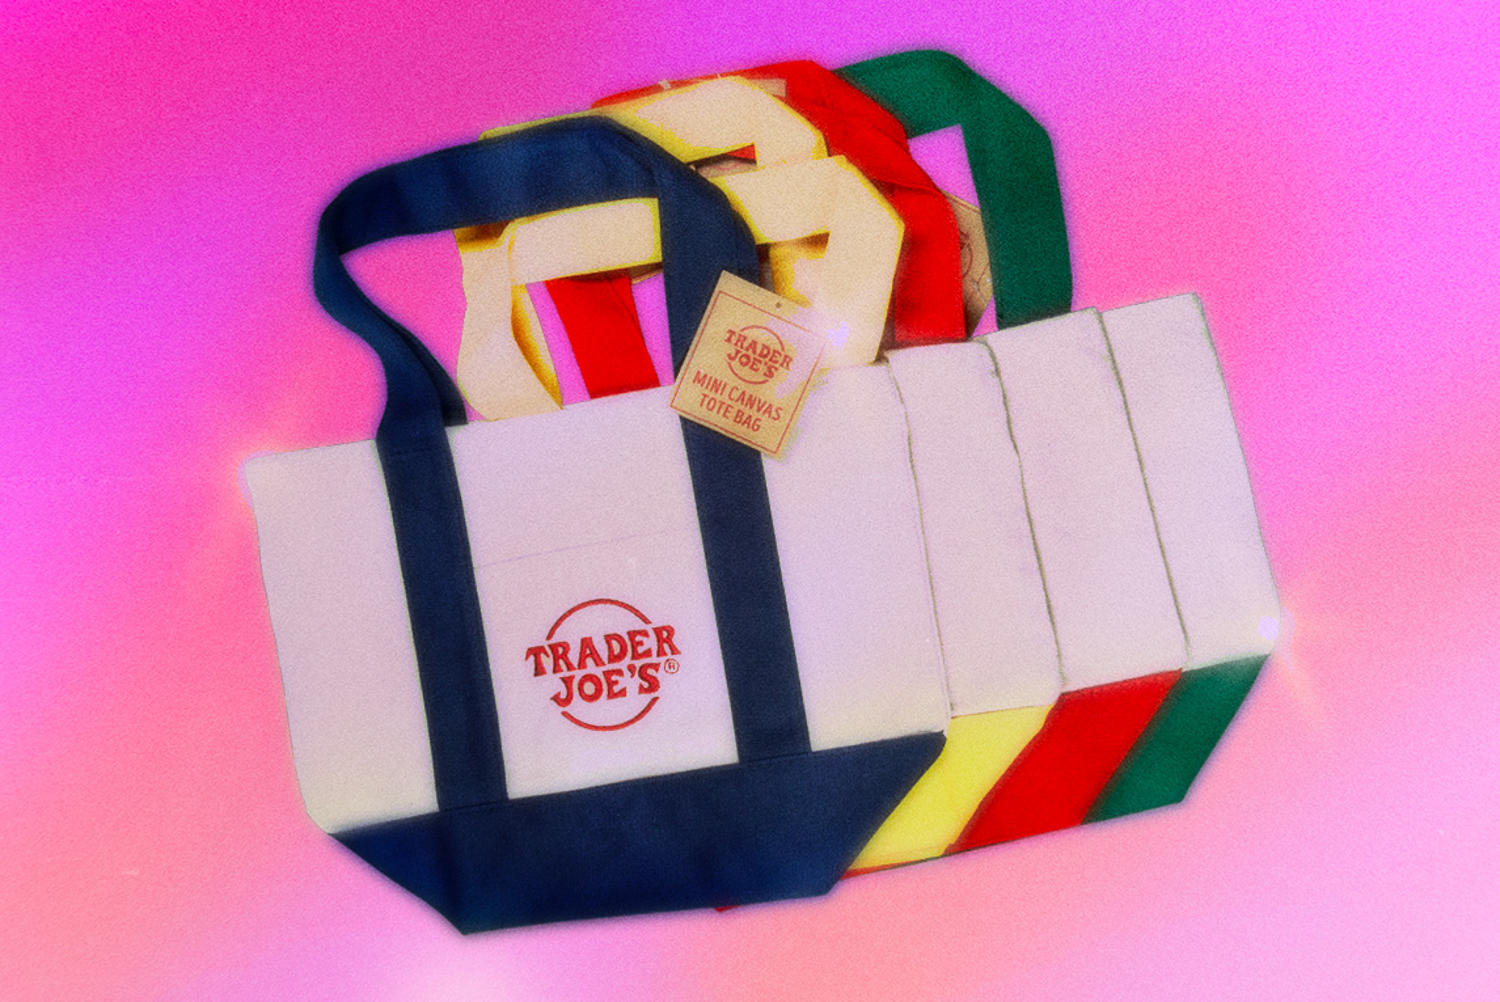 Why $2.99 Trader Joe’s mini tote bags are selling for hundreds and taking over TikTok